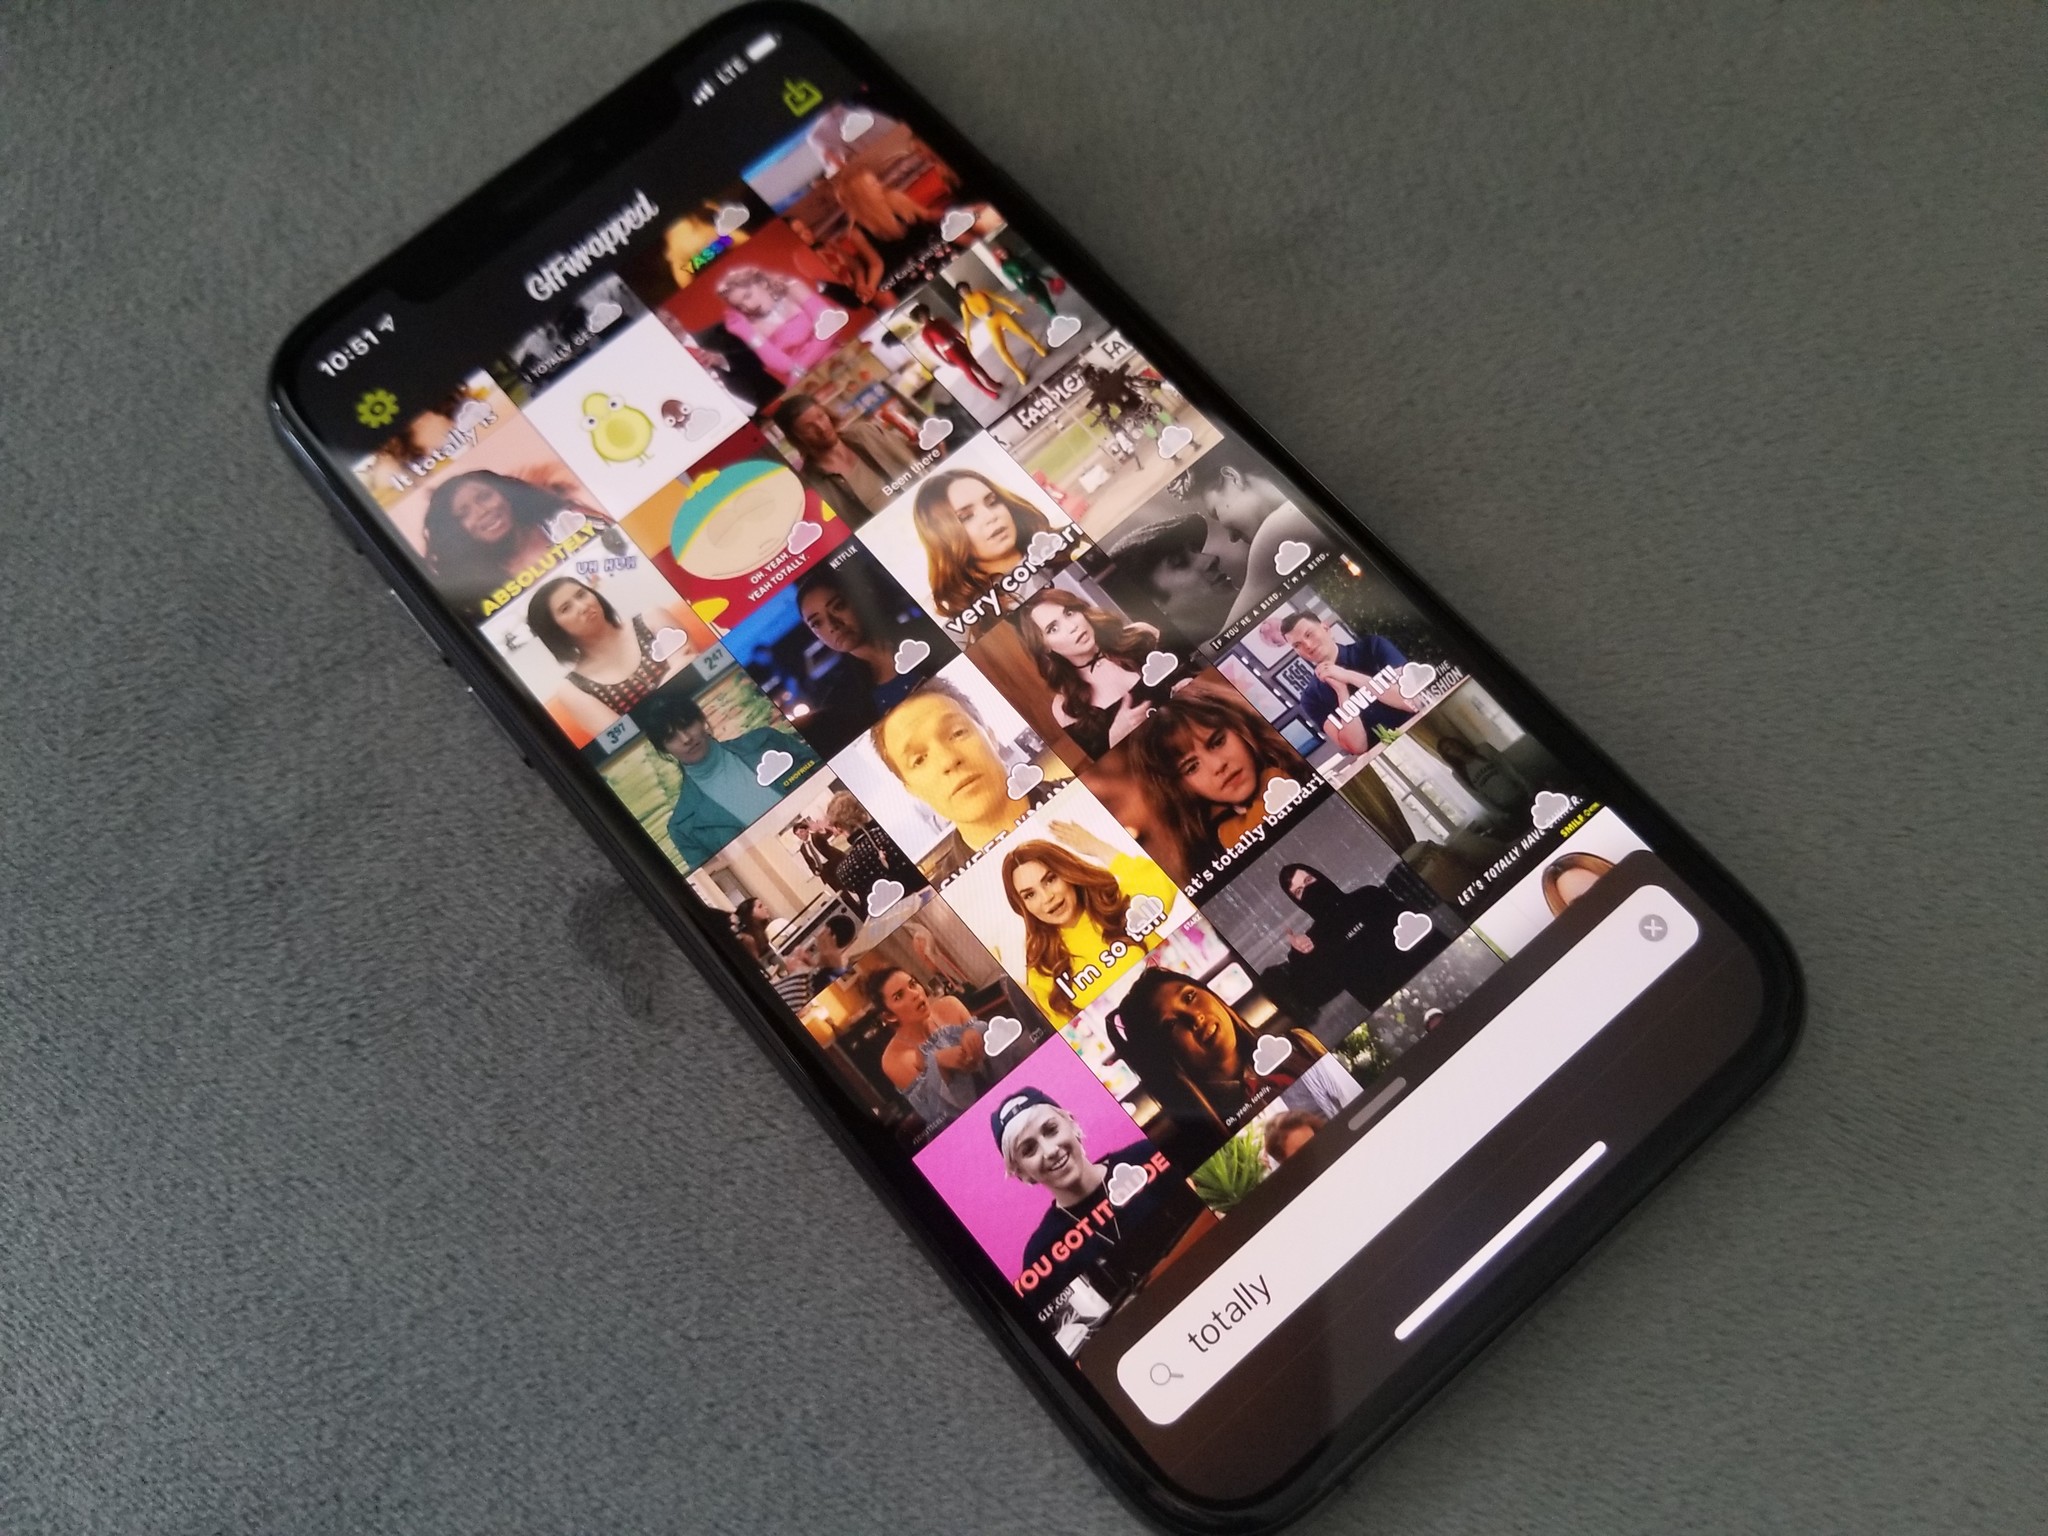 12 Best GIF Maker Apps on iPhone and Android